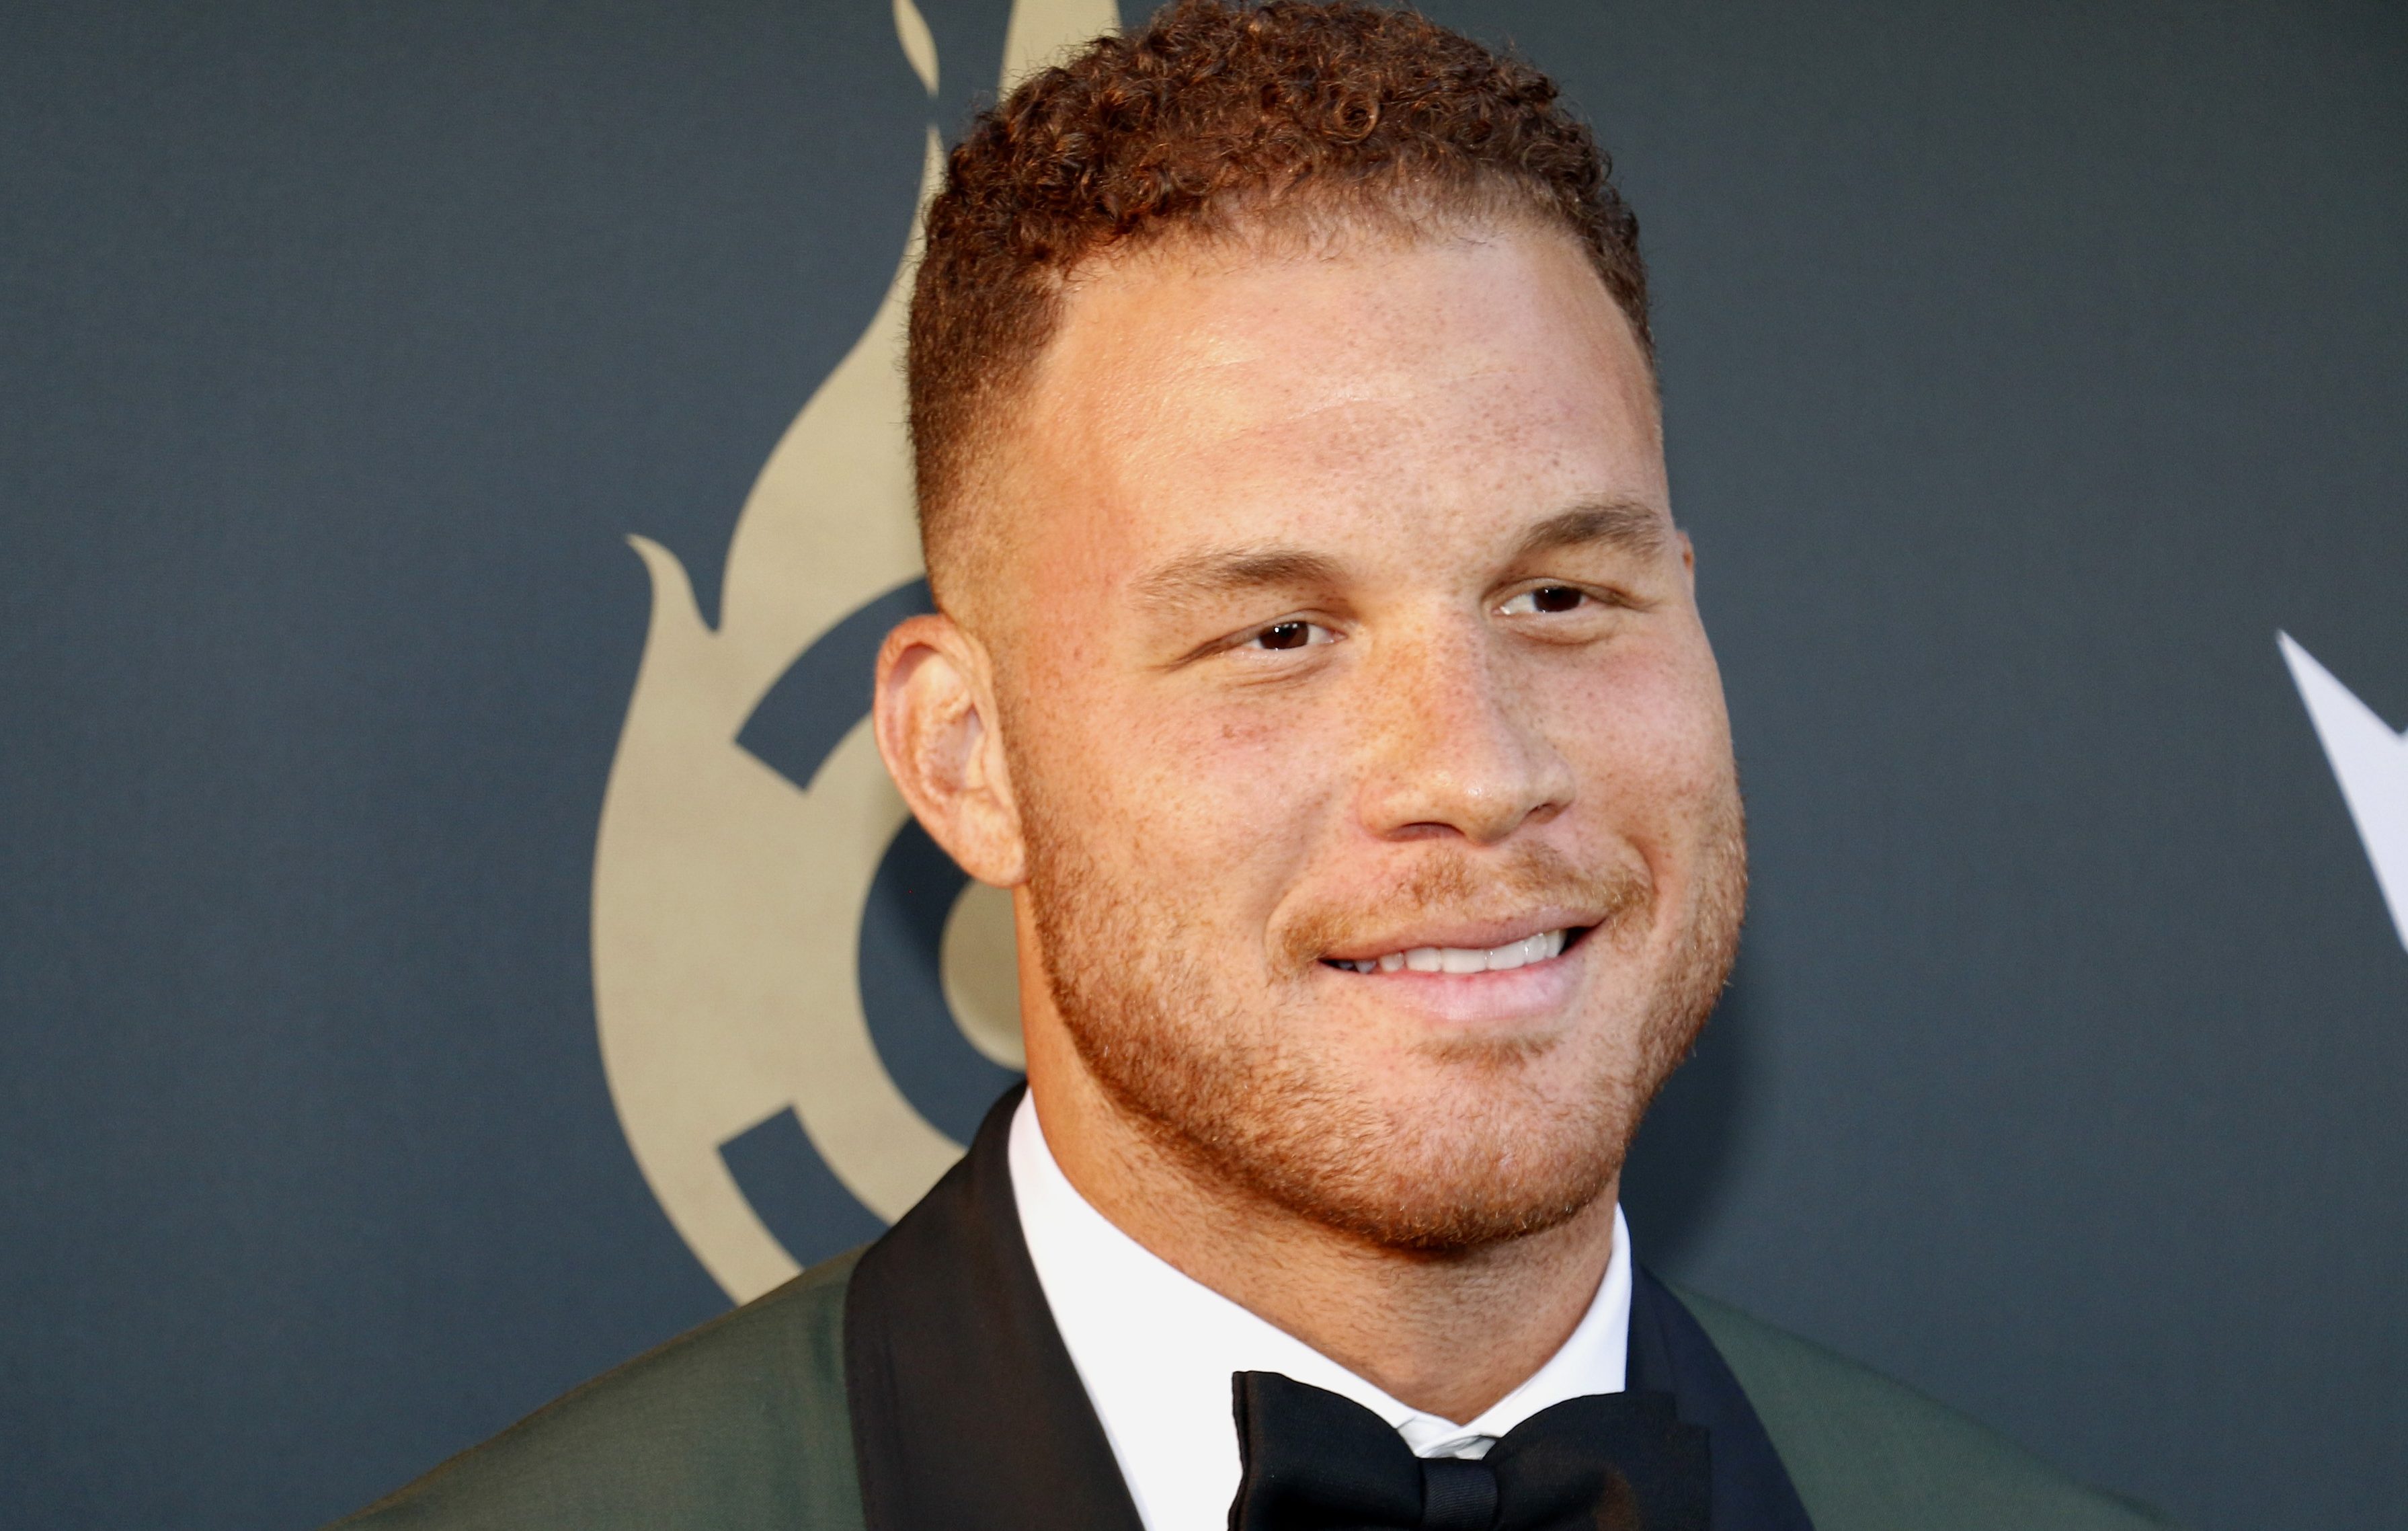 Blake Griffin at the Comedy Central Roast of Alec Baldwin held at the Saban Theatre in Beverly Hills, USA on September 7, 2019.